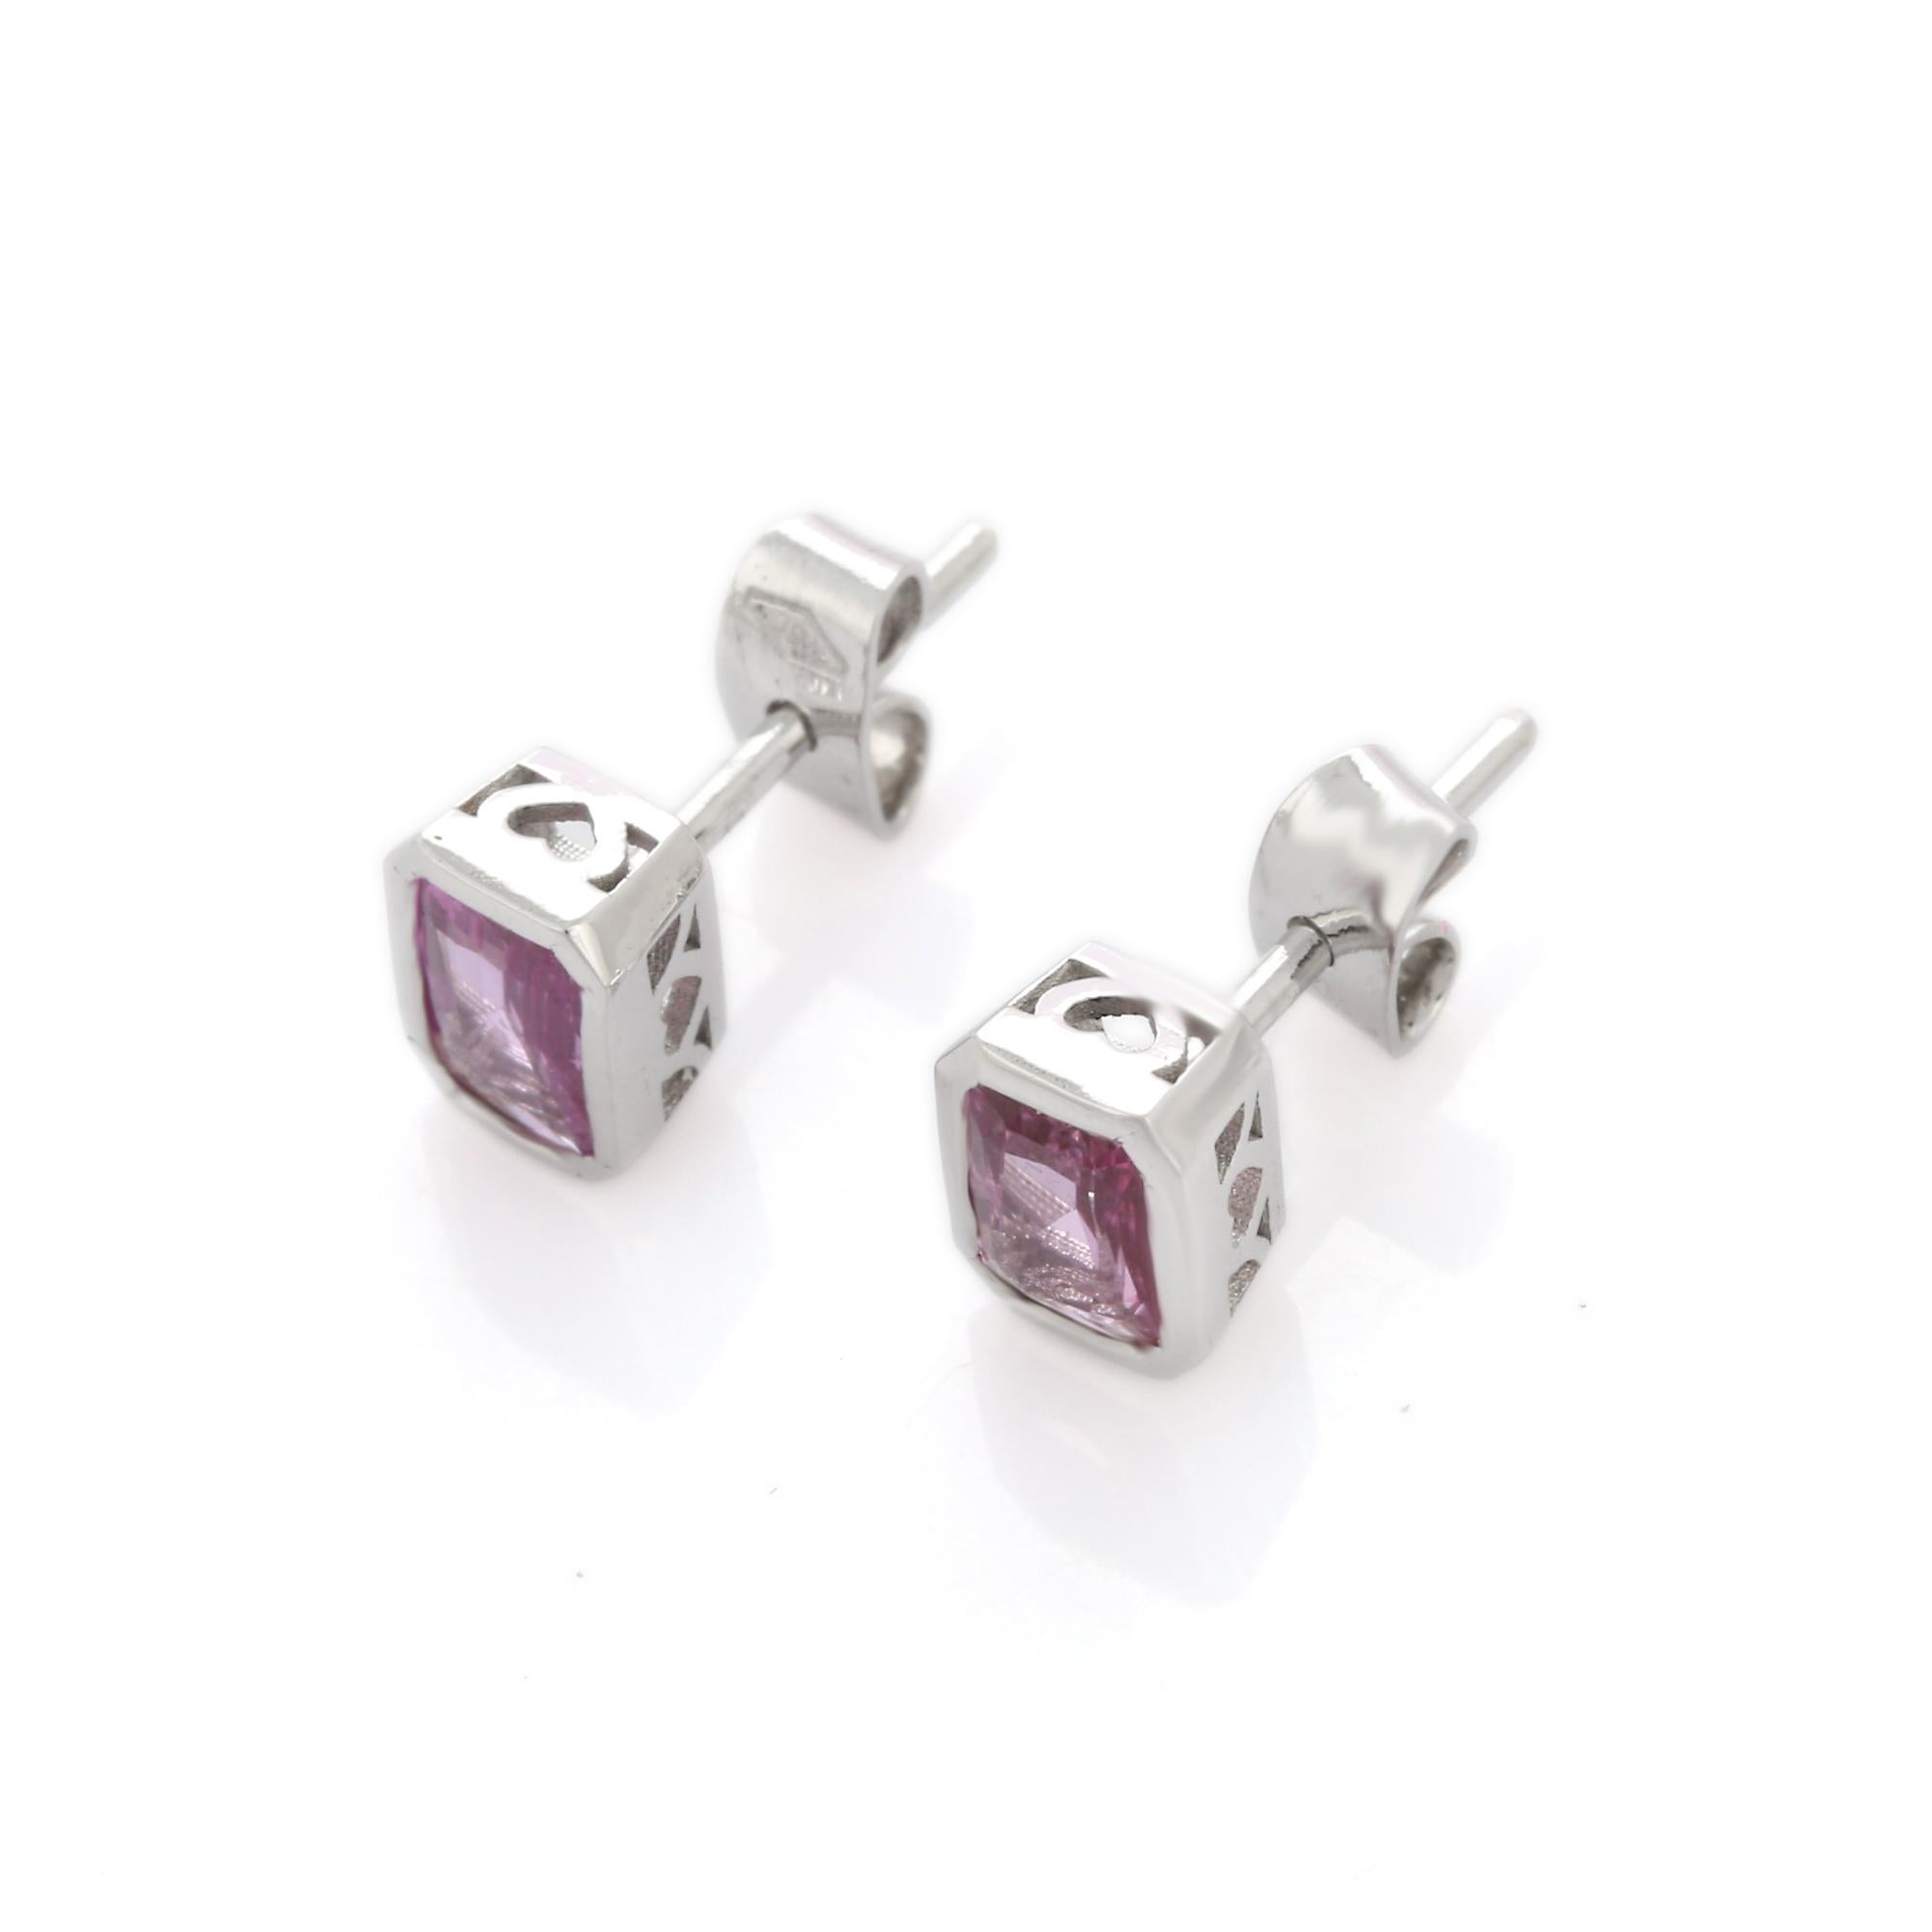 Studs create a subtle beauty while showcasing the colors of the natural precious gemstones making a statement.

Octagon cut pink sapphire studs in 18K gold. Embrace your look with these stunning pair of earrings suitable for any occasion to complete